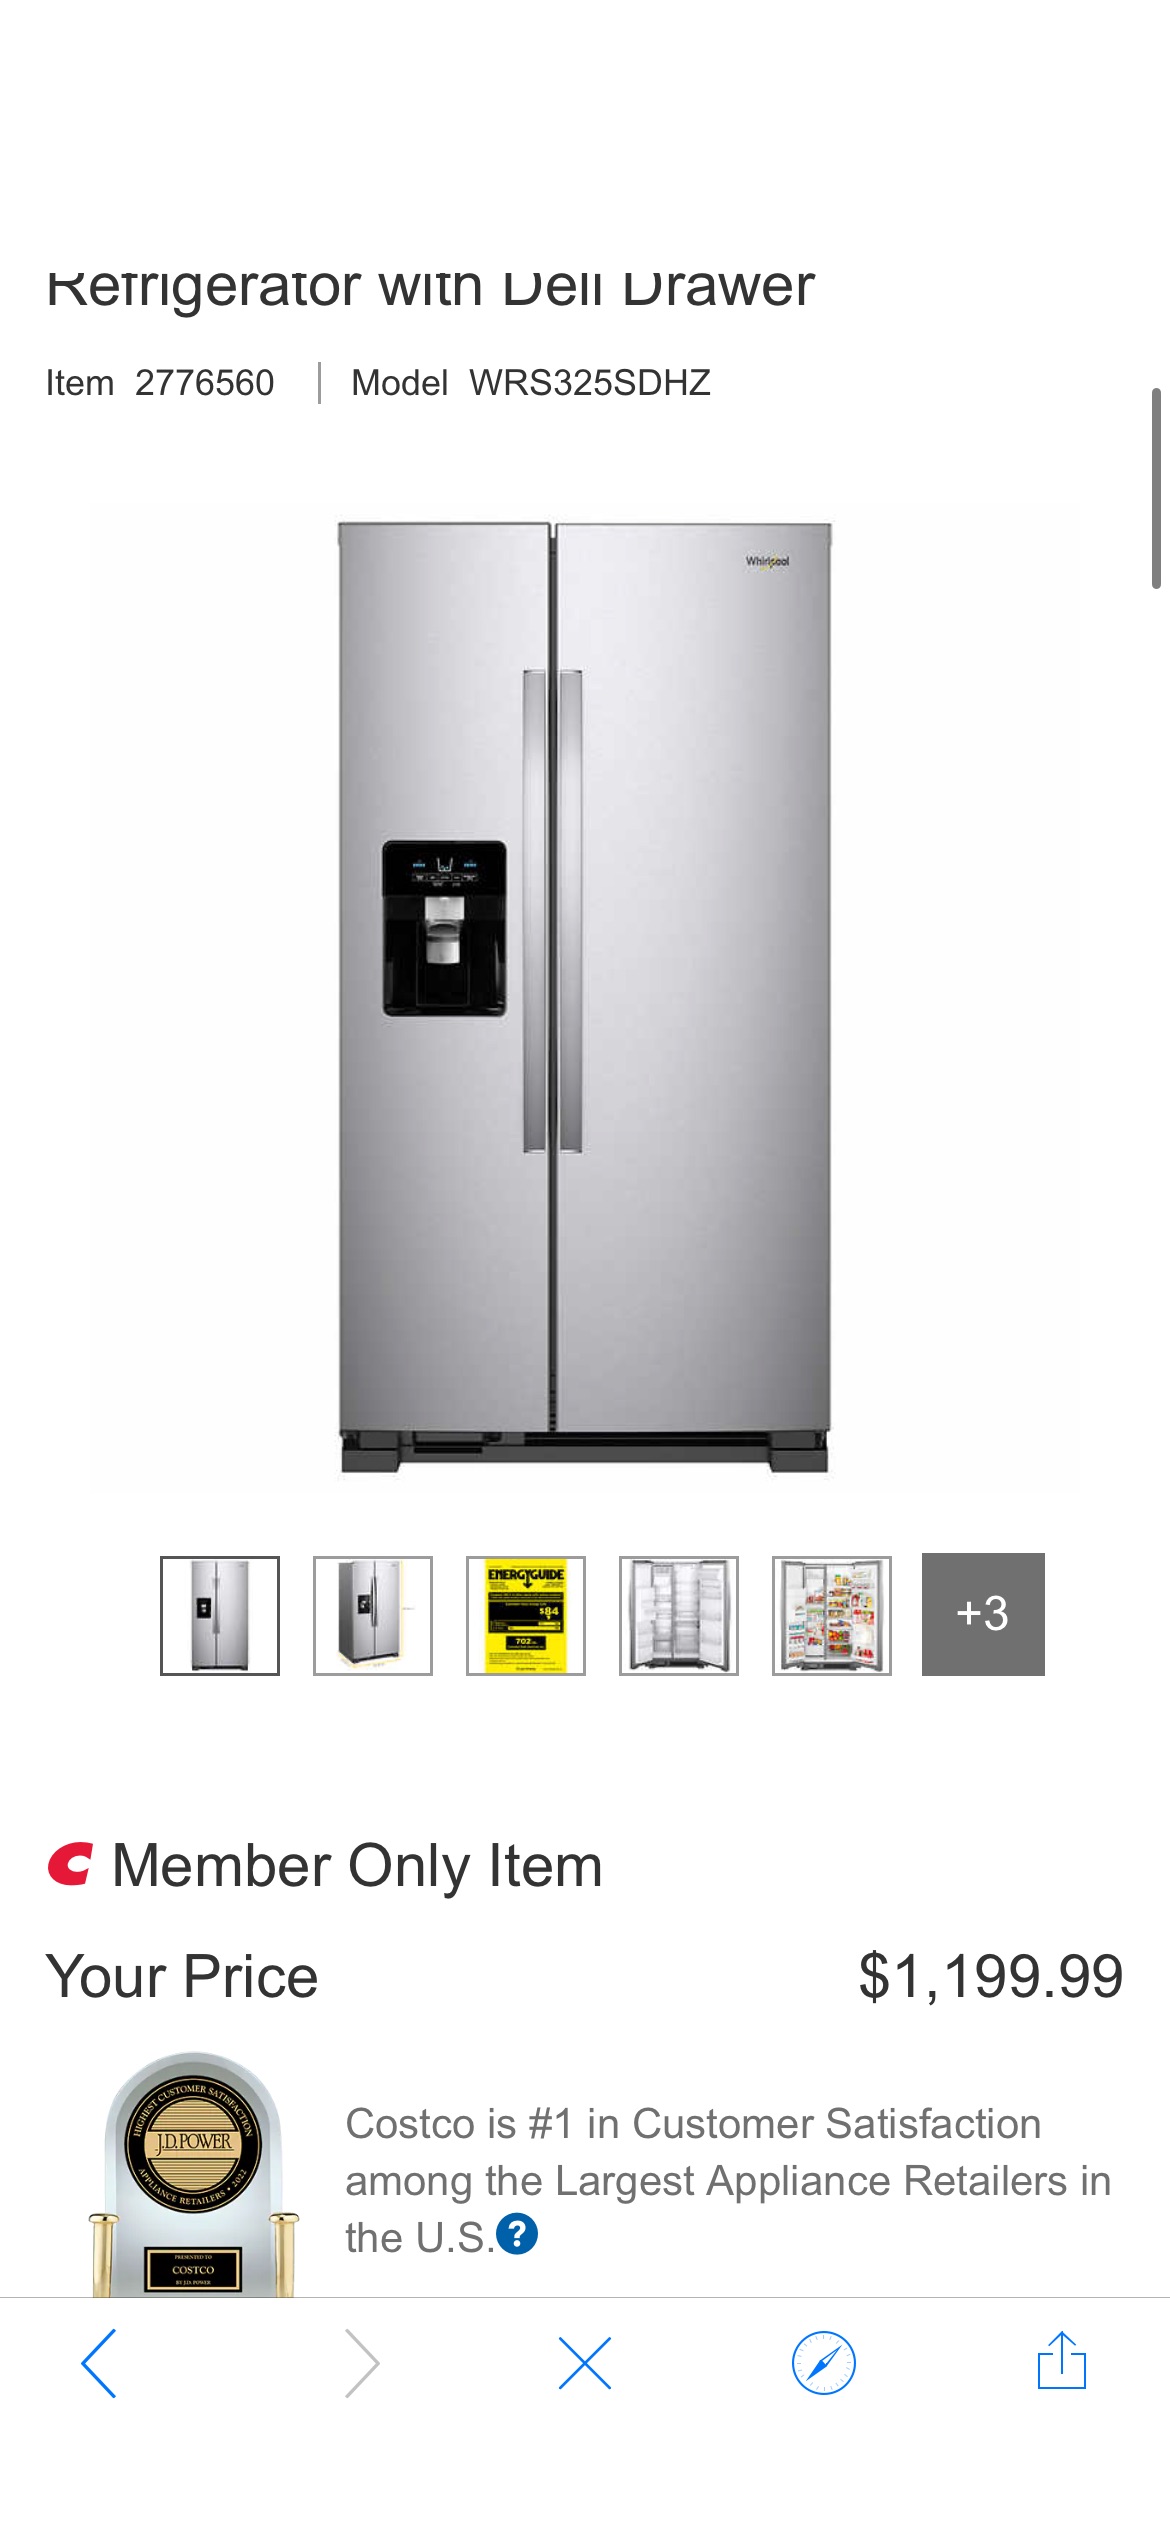 Whirlpool 25 cu. ft. Large Side-by-Side Refrigerator with Deli Drawer | Costco